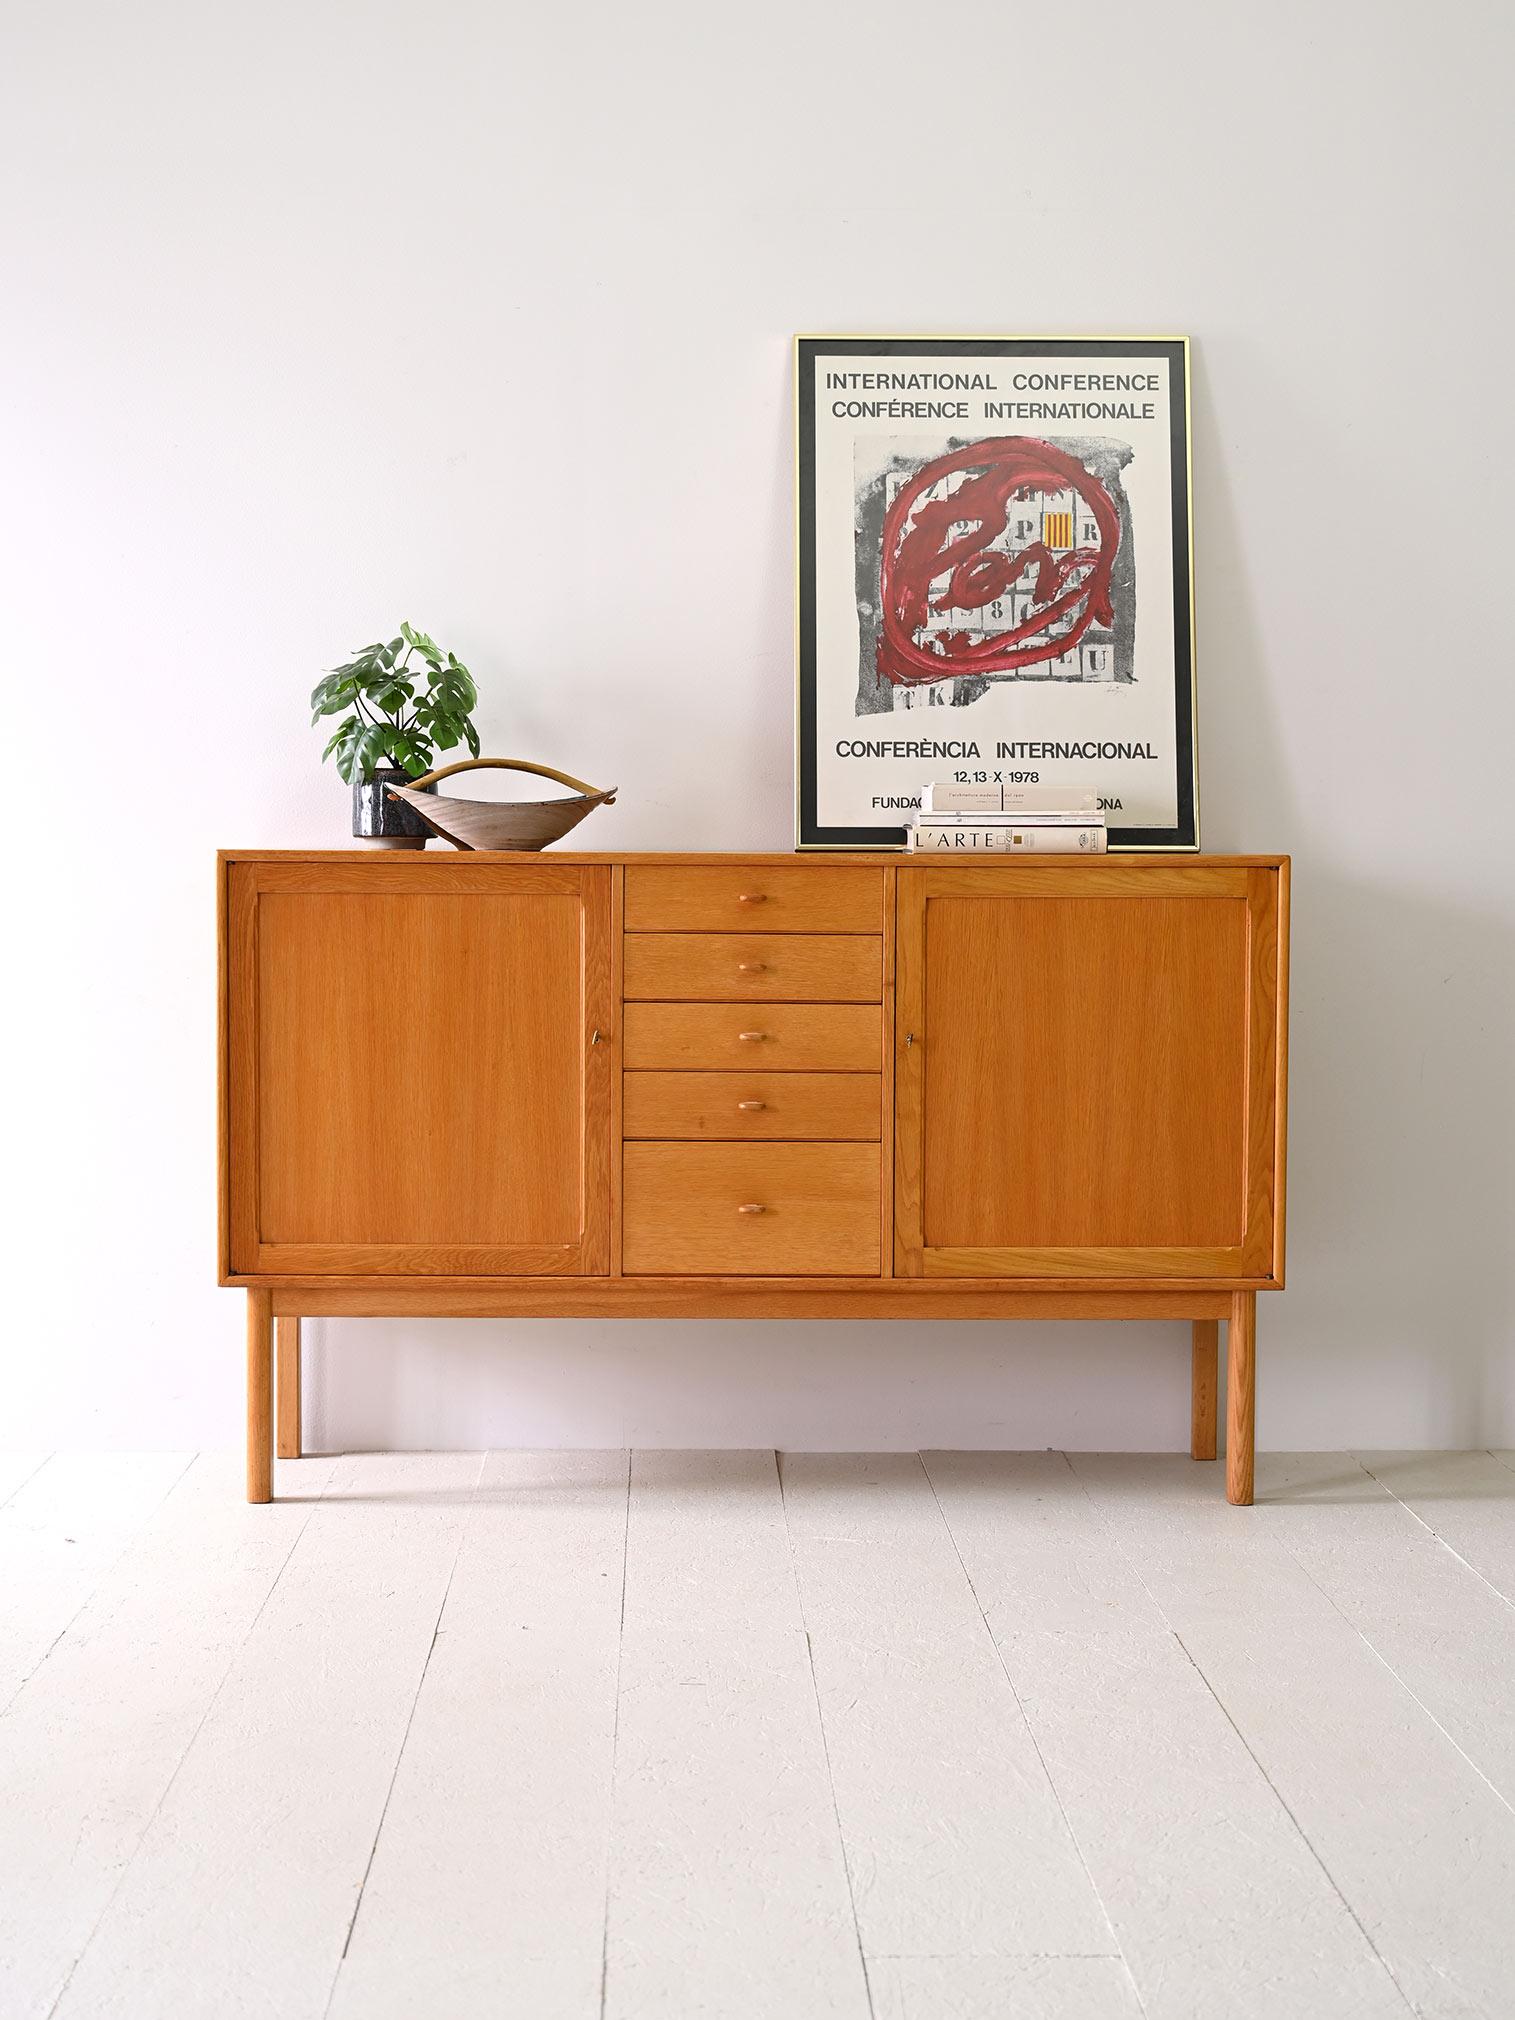 Scandinavian-made highboard manufactured in 1962 in Sweden by the Bodafors company.

The frame is made of oak wood and features five central drawers while on the sides are two lockable hinged doors that conceal two compartments with shelves.

The